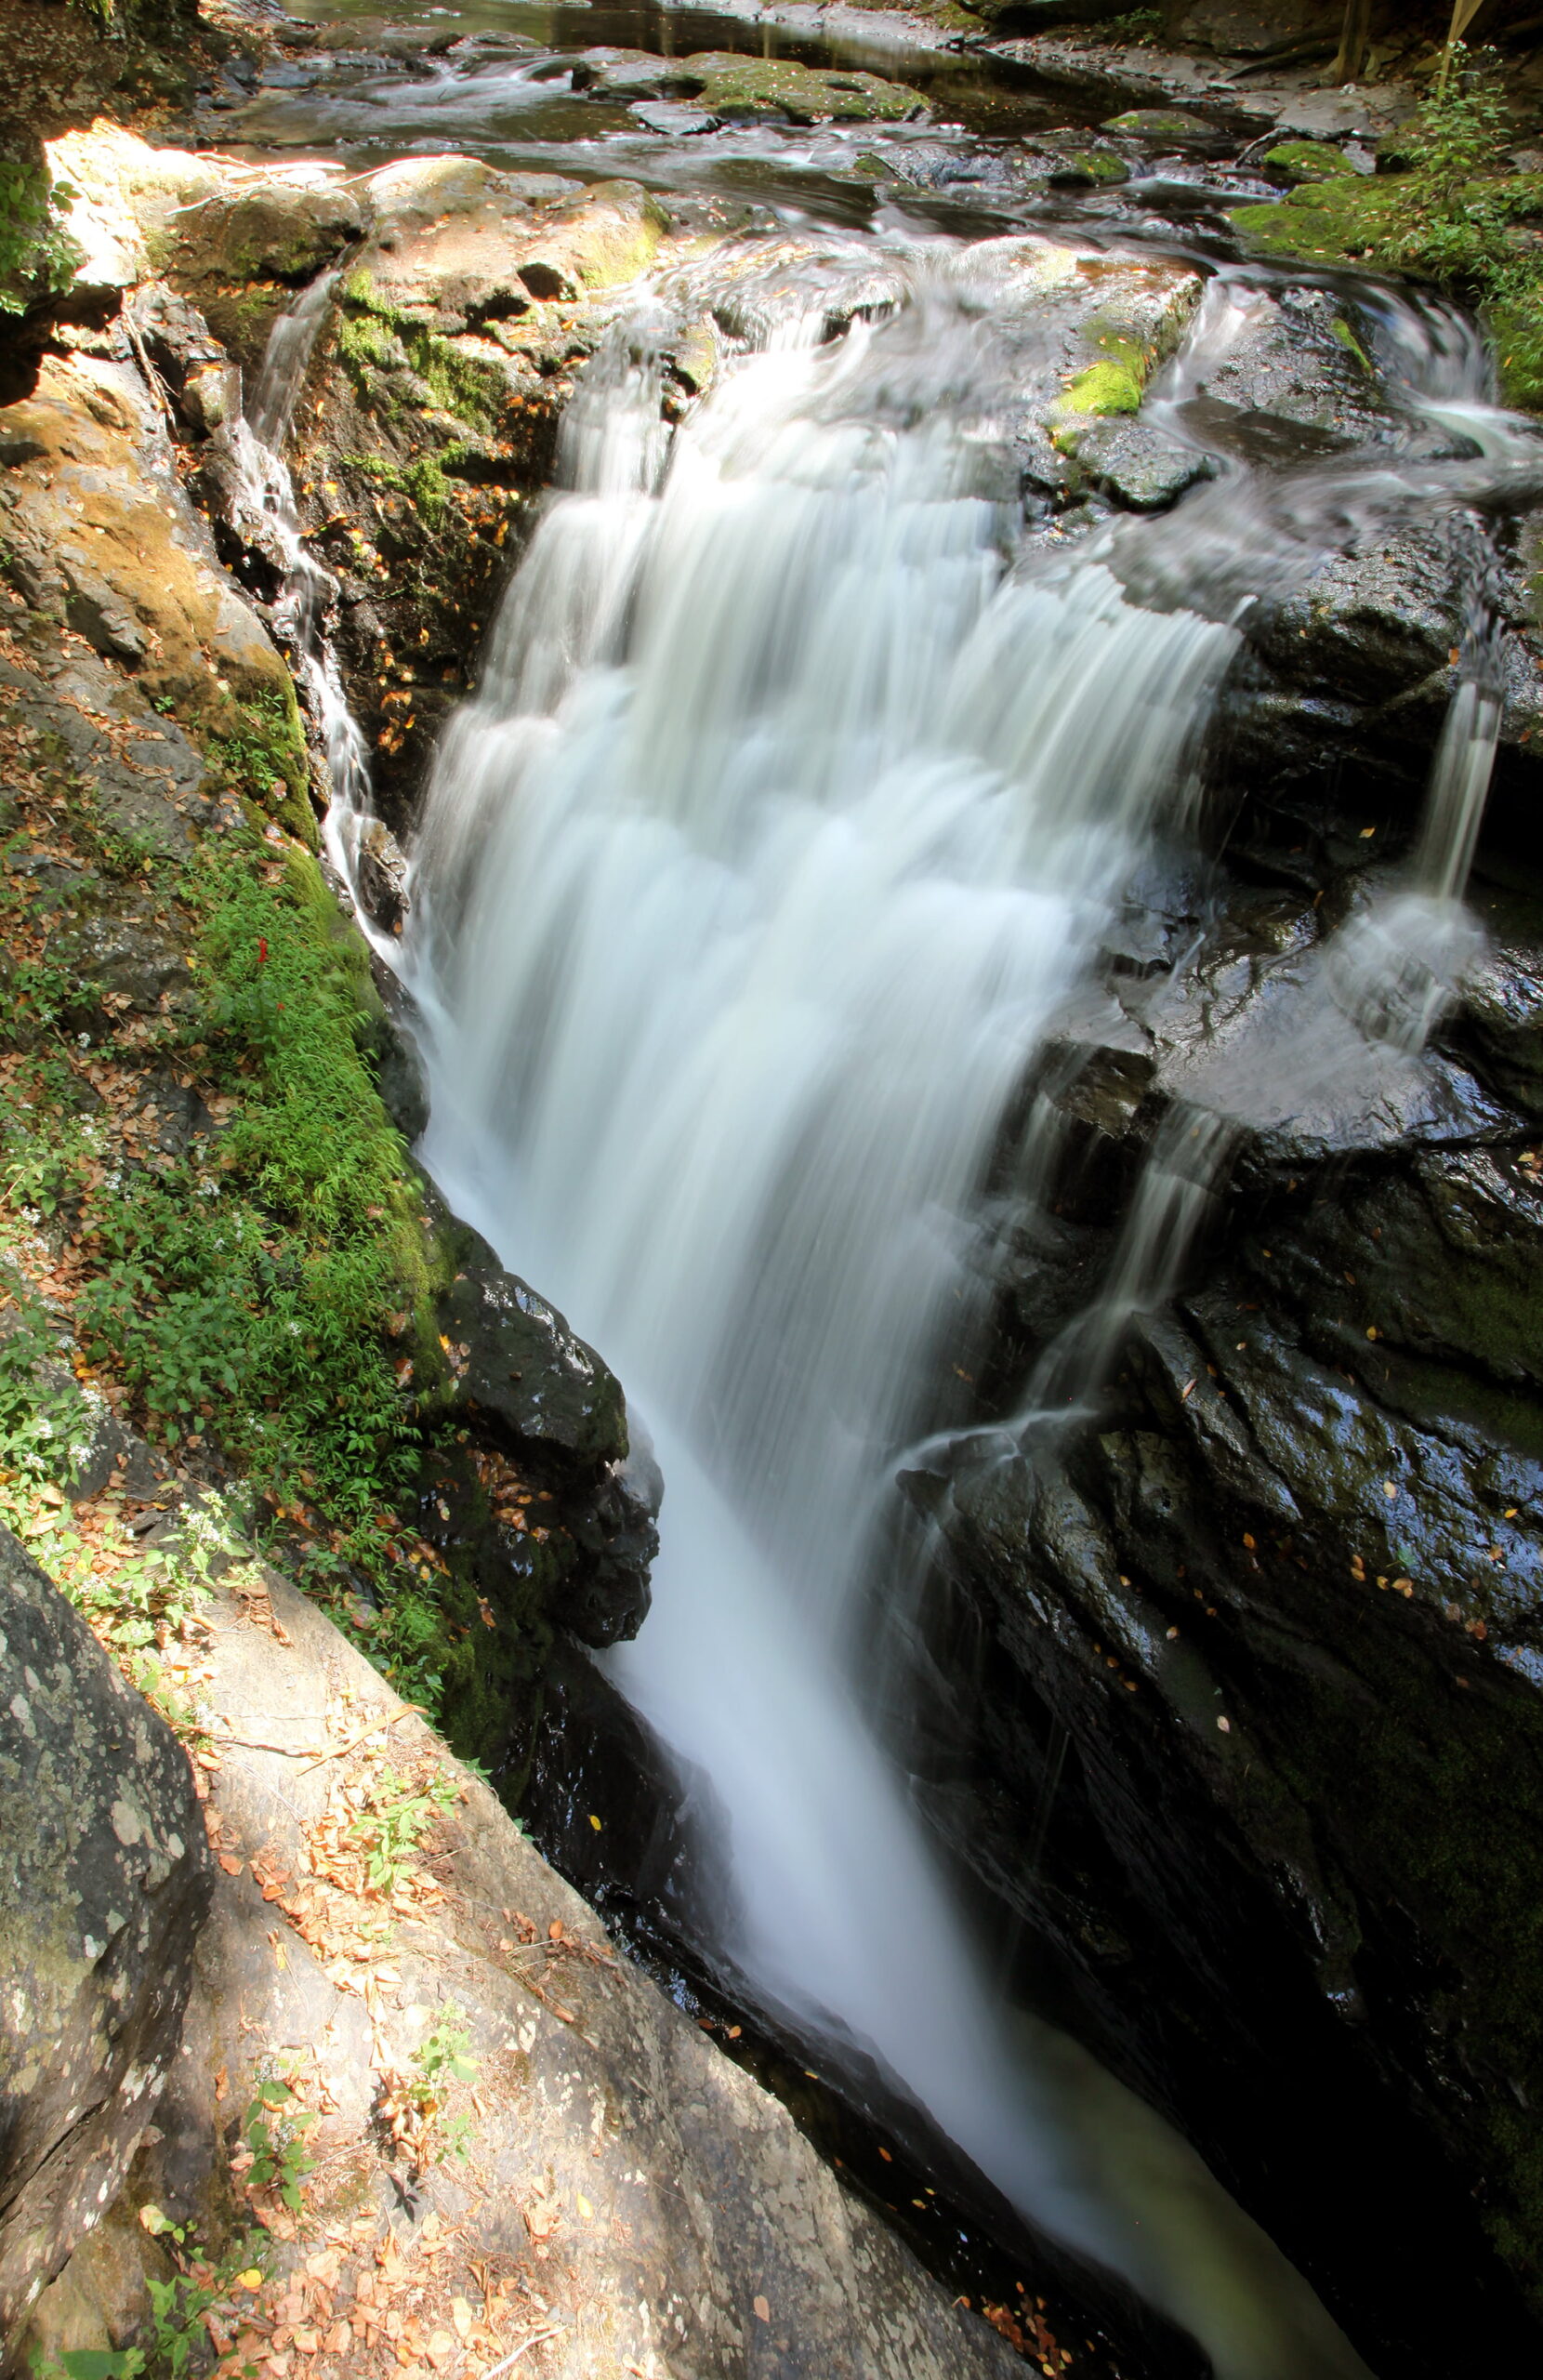 You’ll Find Some of the Most Beautiful Poconos Waterfalls While Hiking